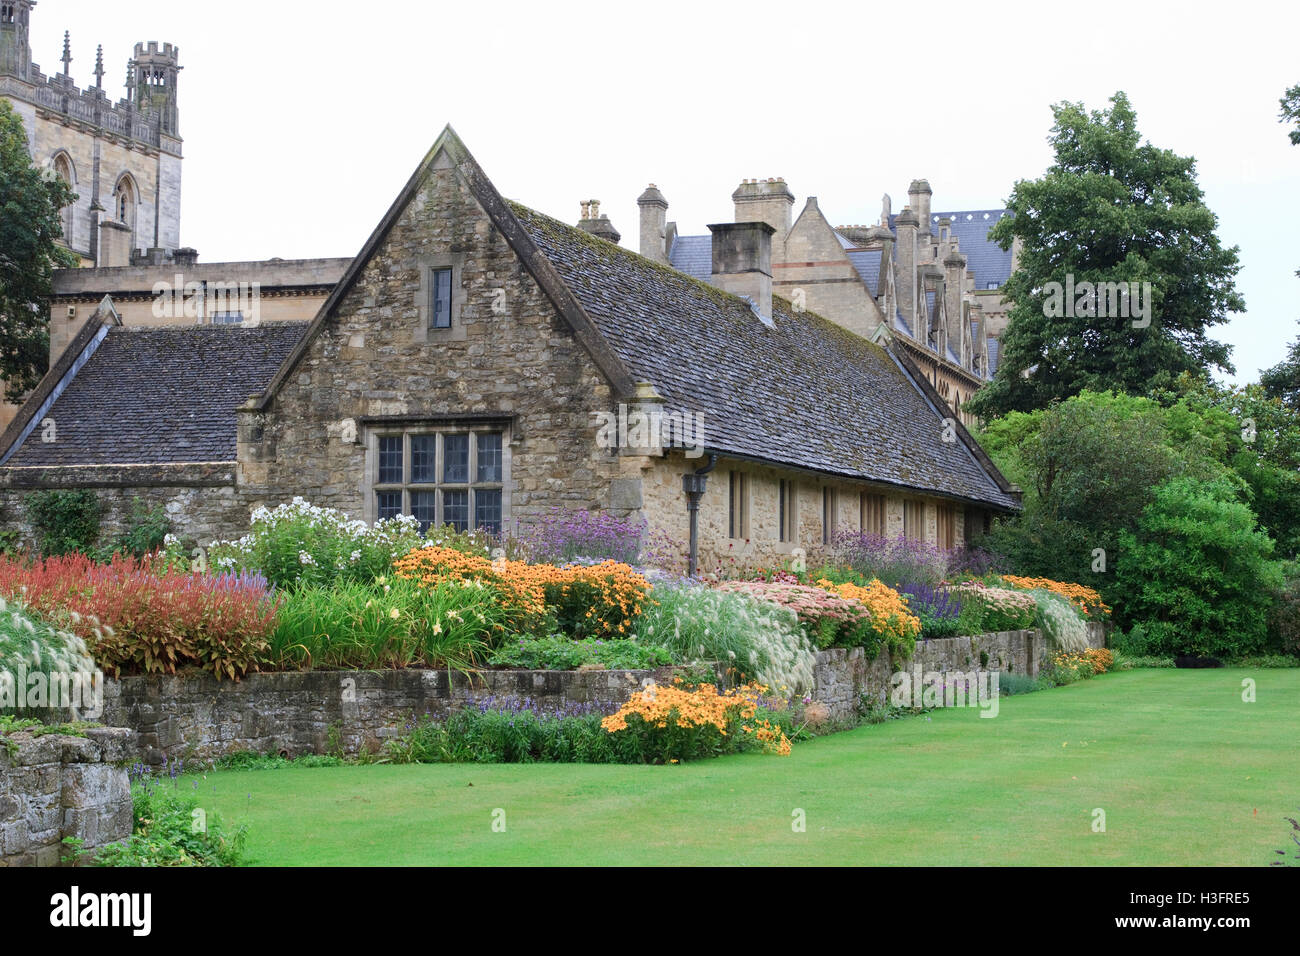 Pretty entrance to Broad Walk and Christ Church in Oxford, England, as seen from the public road outside (St Aldate's). Stock Photo